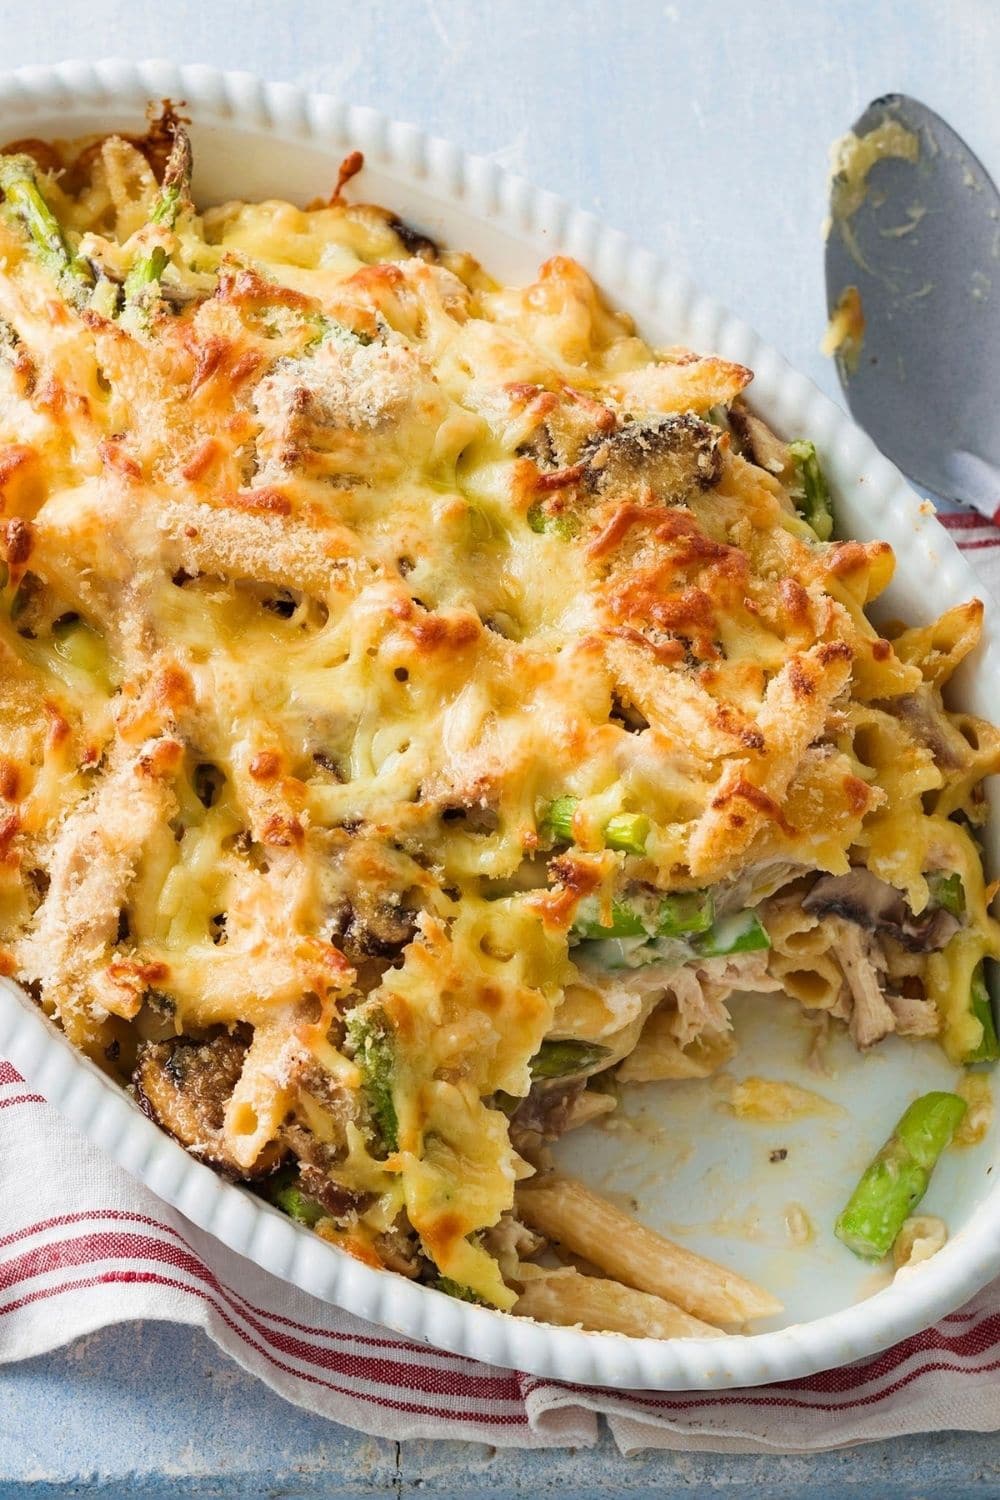 Ground Beef Recipes Cabbage Casserole To Lose Weight